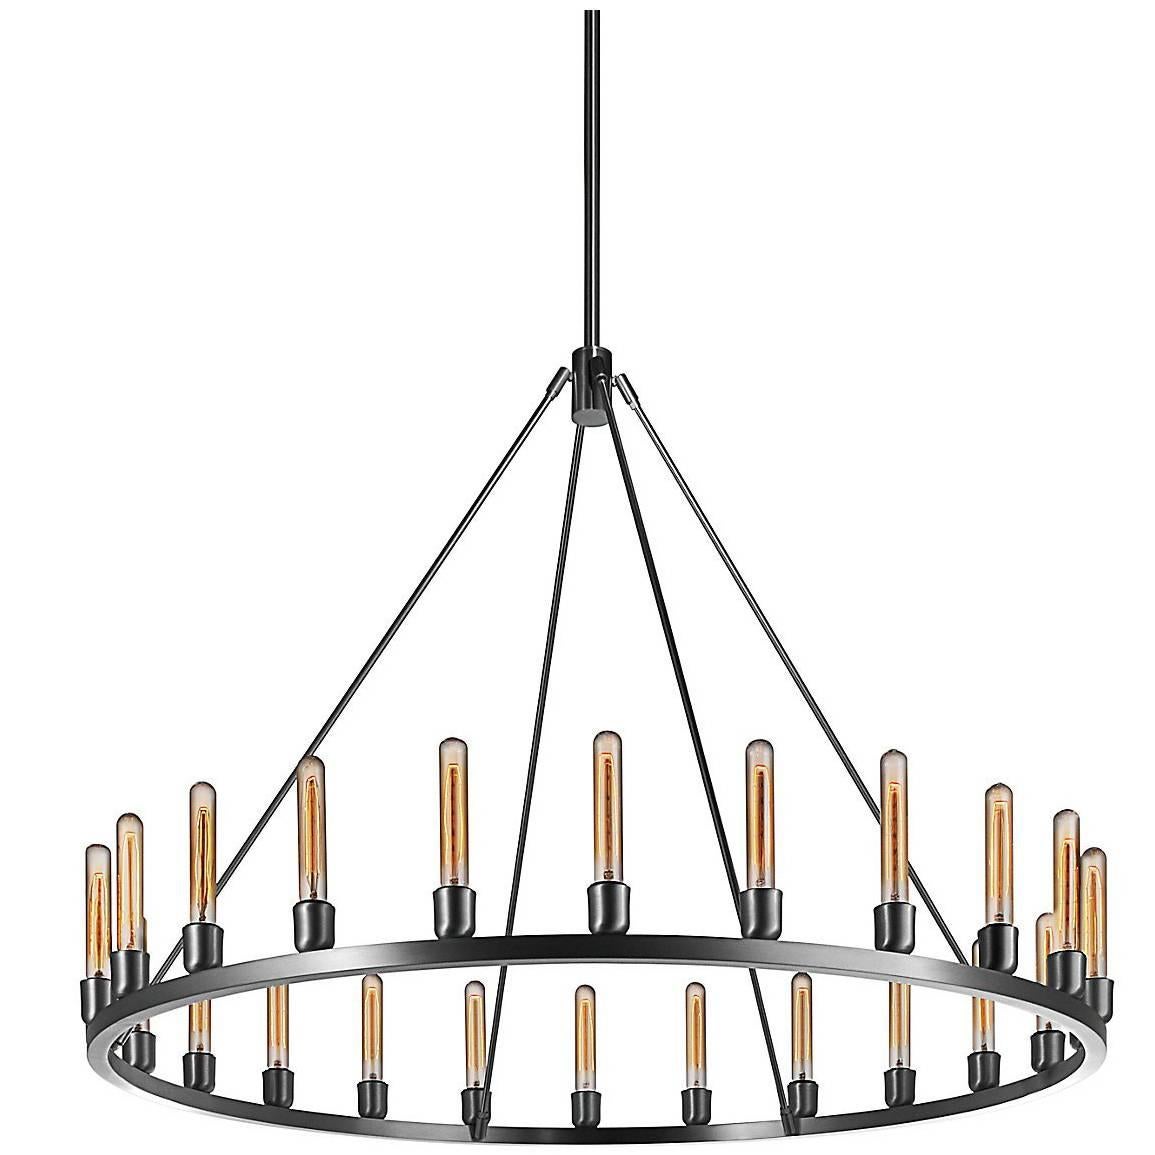 Spark Modern Polished Nickel Chandelier Light, Made in the USA For Sale